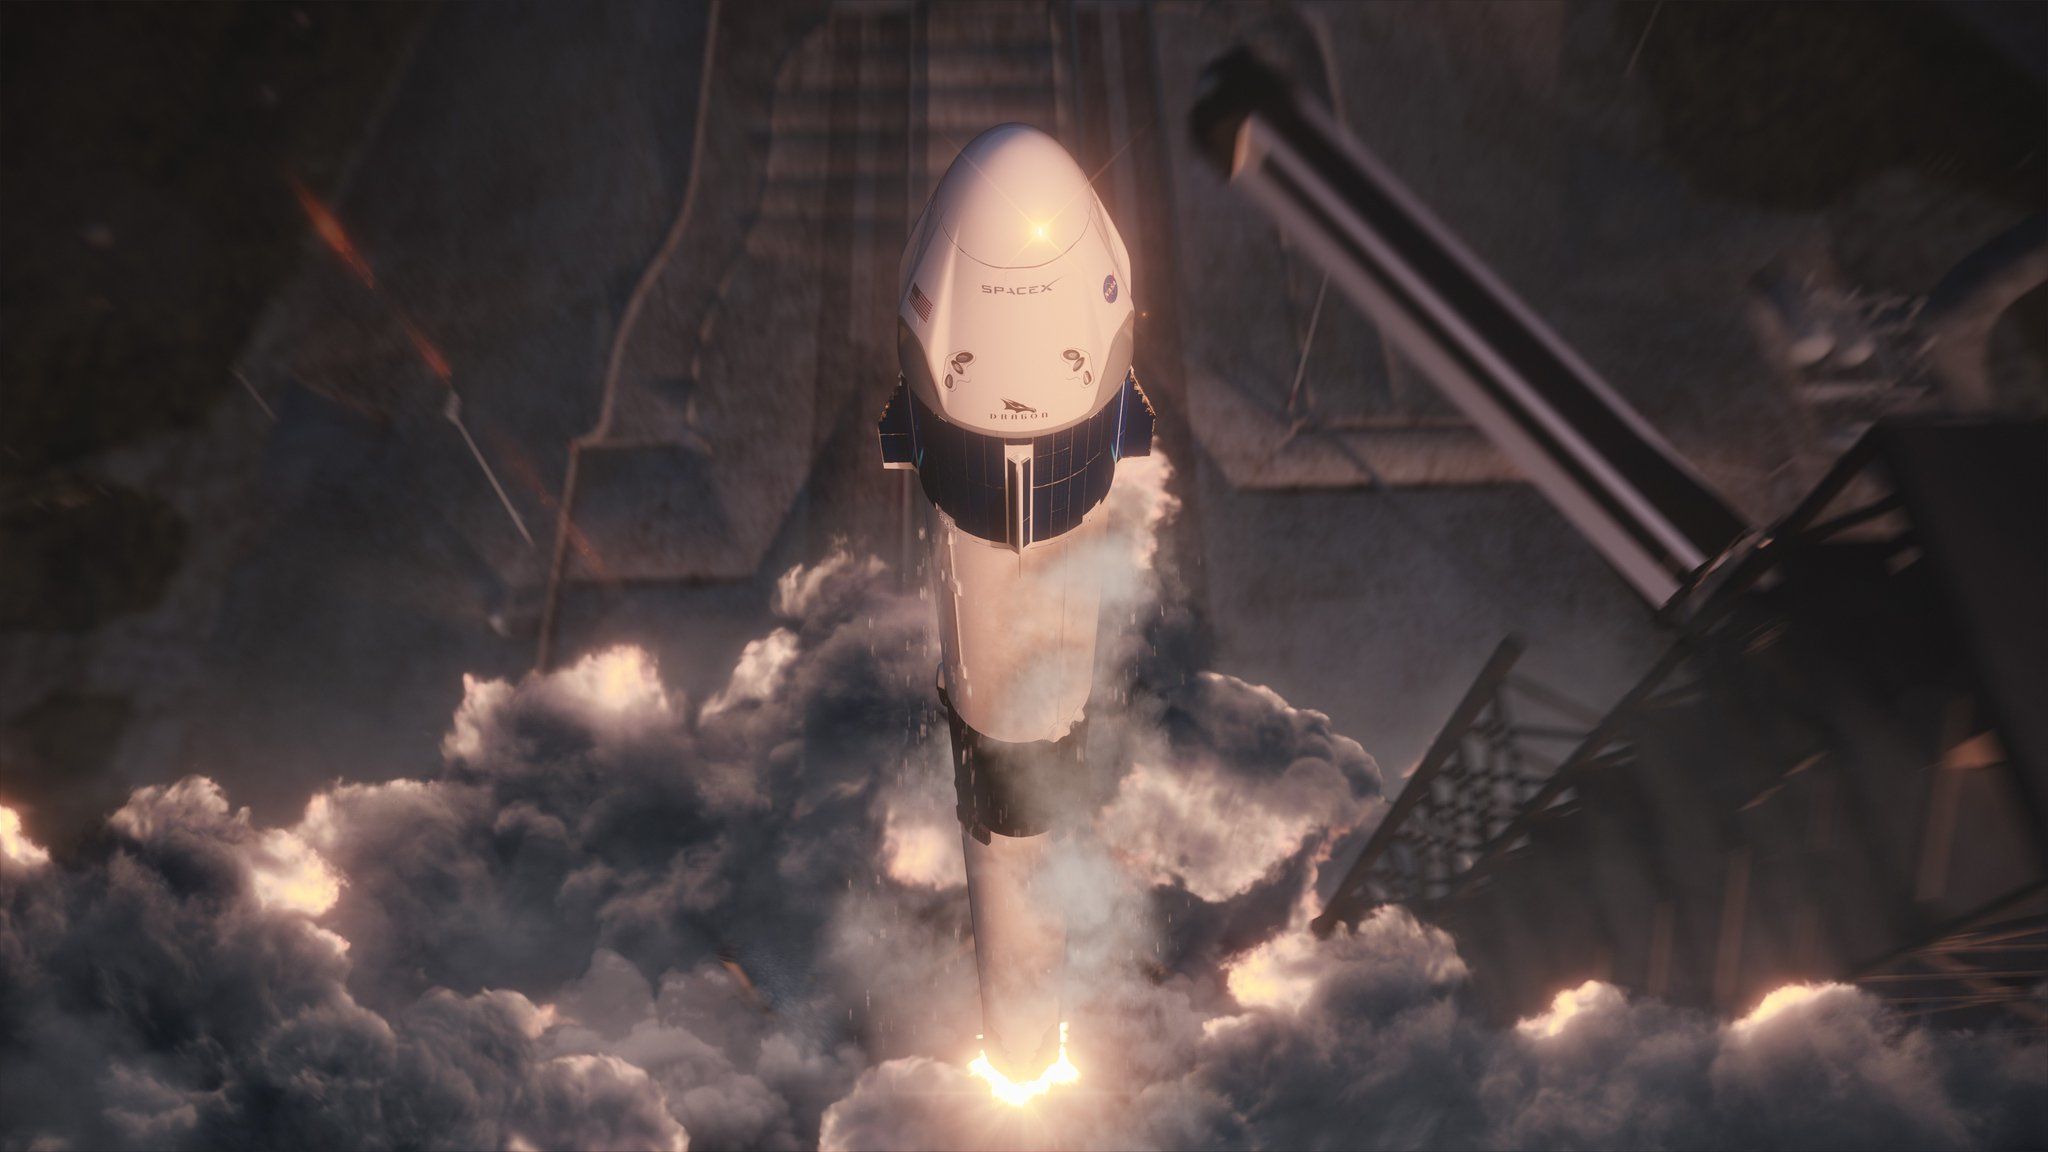 Artwork of the Crew Dragon capsule launching into space. Credit: SpaceX